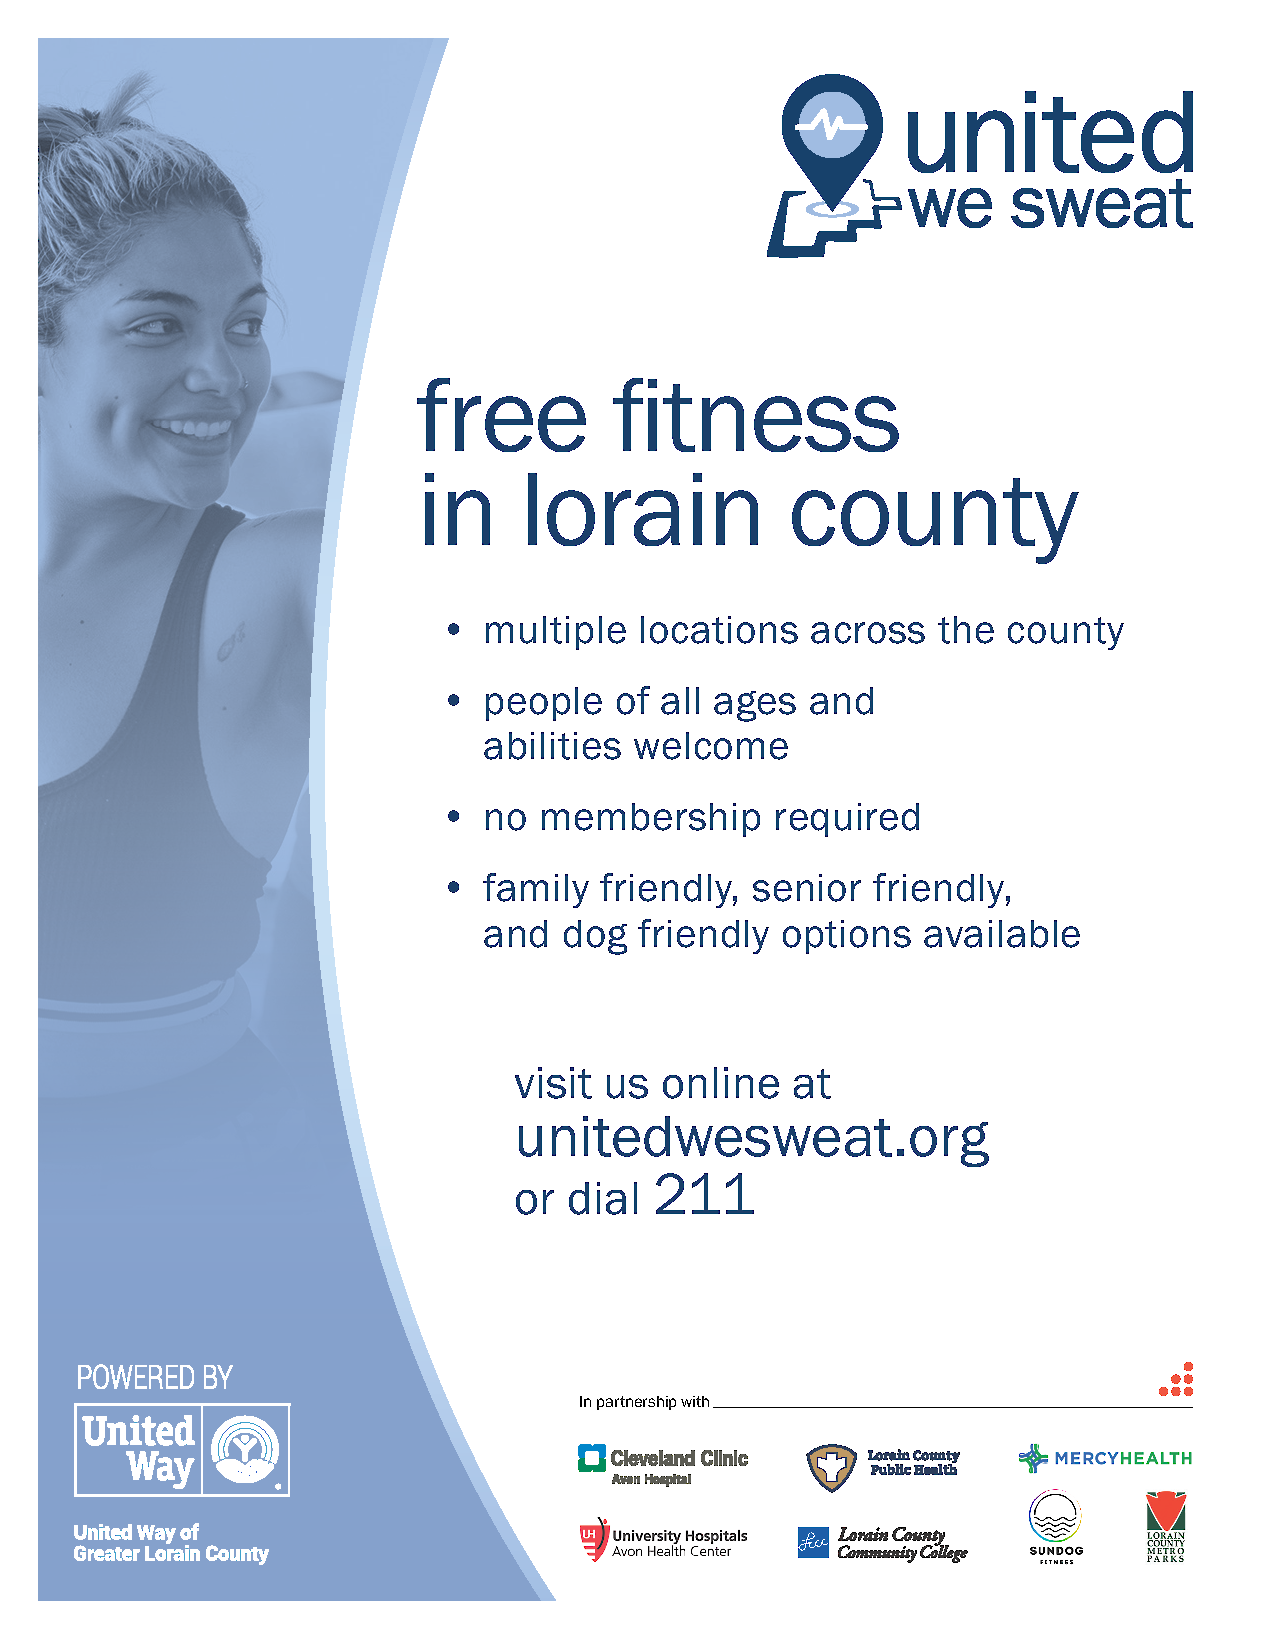 Free Fitness Flyer template to promote unitedwesweat.org